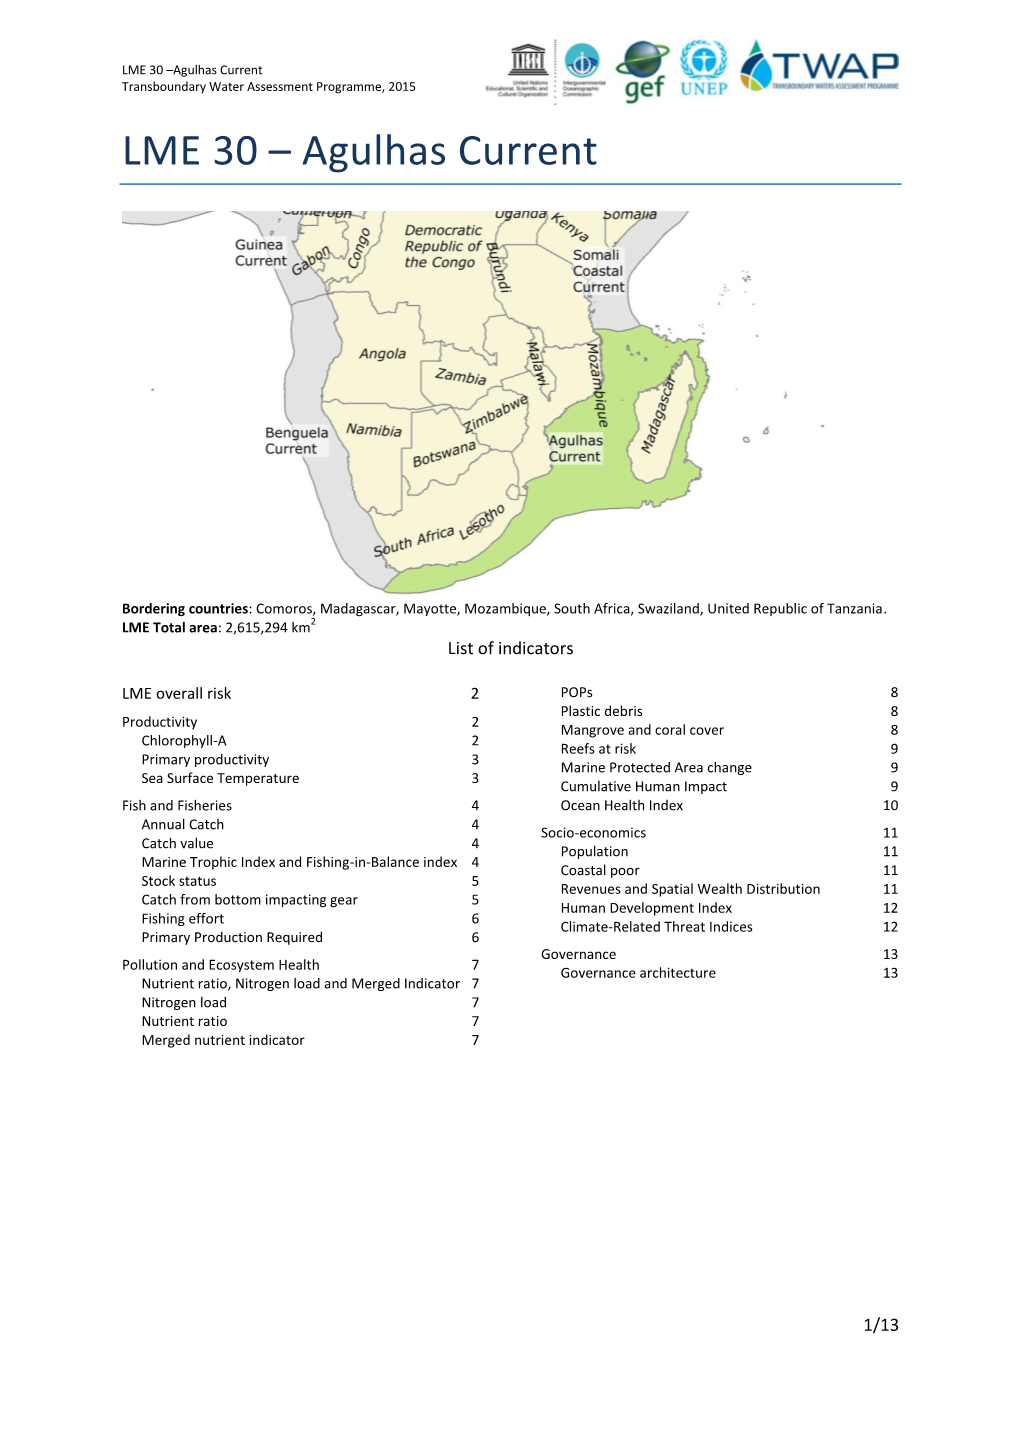 Agulhas Current Transboundary Water Assessment Programme, 2015